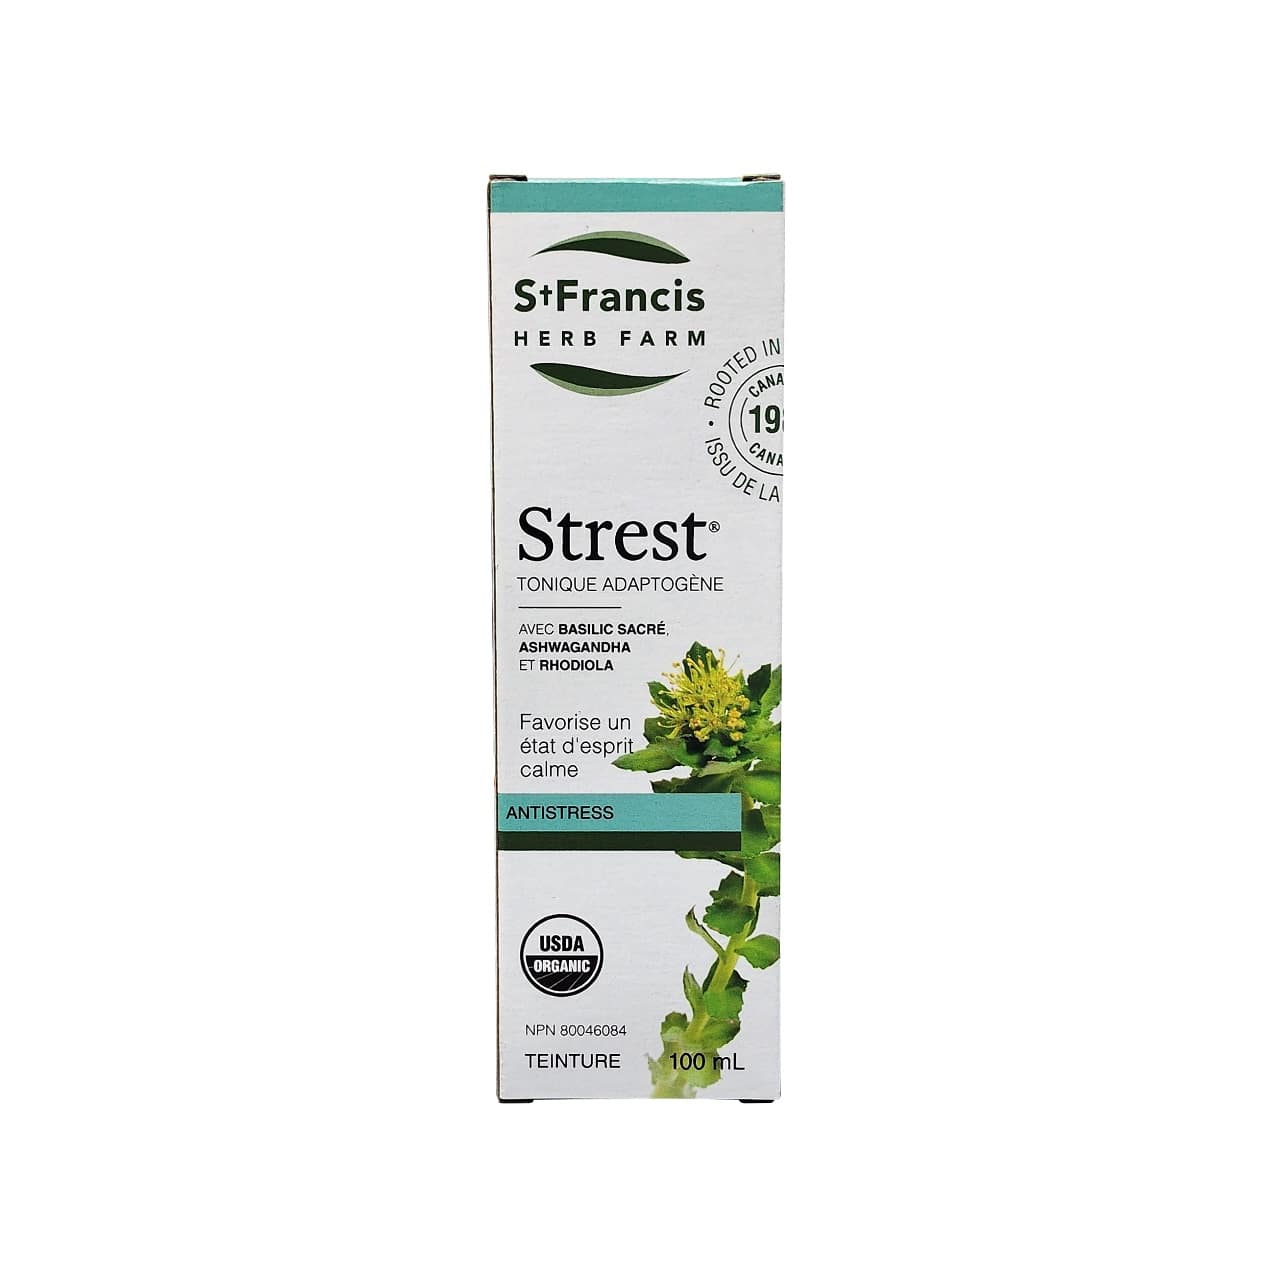 Product label for St. Francis Strest Adaptogenic Tonic for Stress Relief (100 mL) in French